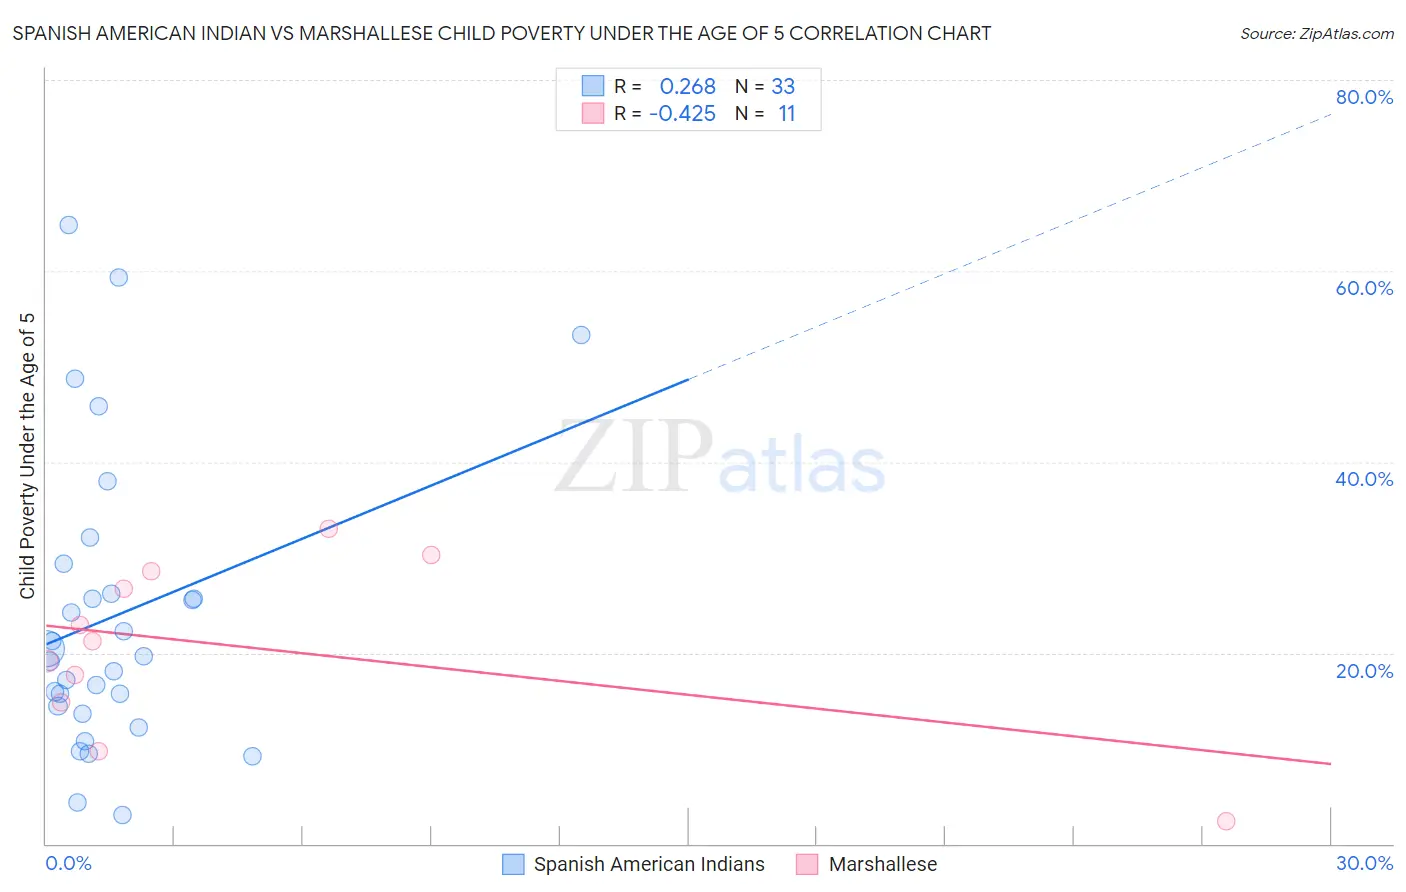 Spanish American Indian vs Marshallese Child Poverty Under the Age of 5